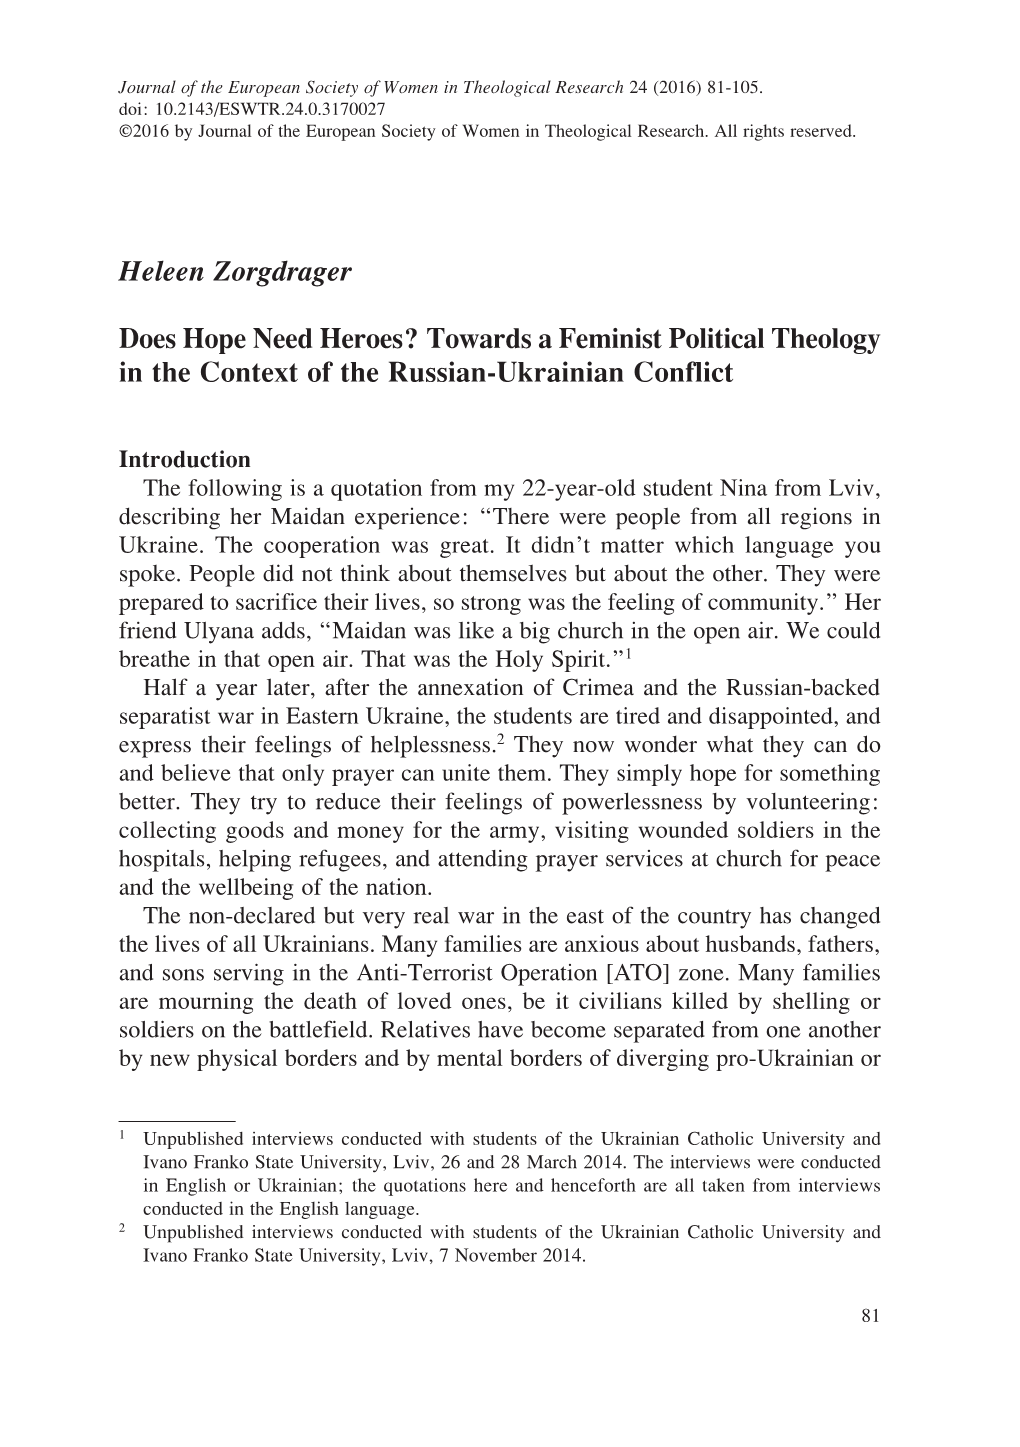 Towards a Feminist Political Theology in the Context of the Russian-Ukrainian Conflict